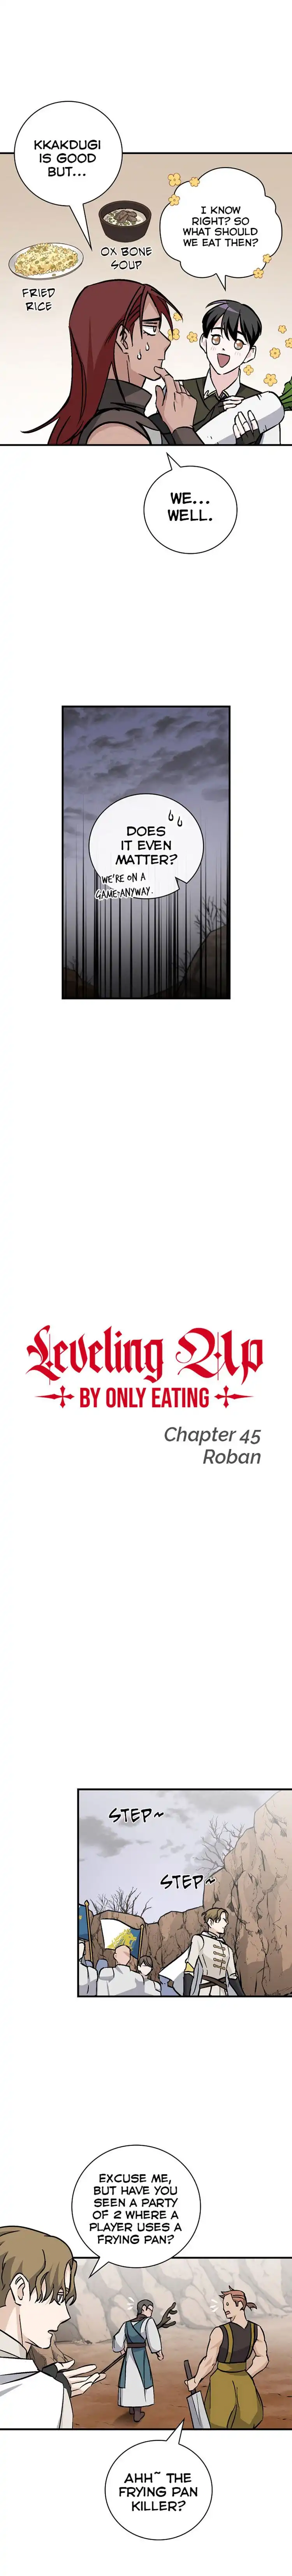 Leveling Up, By Only Eating! Chapter 45